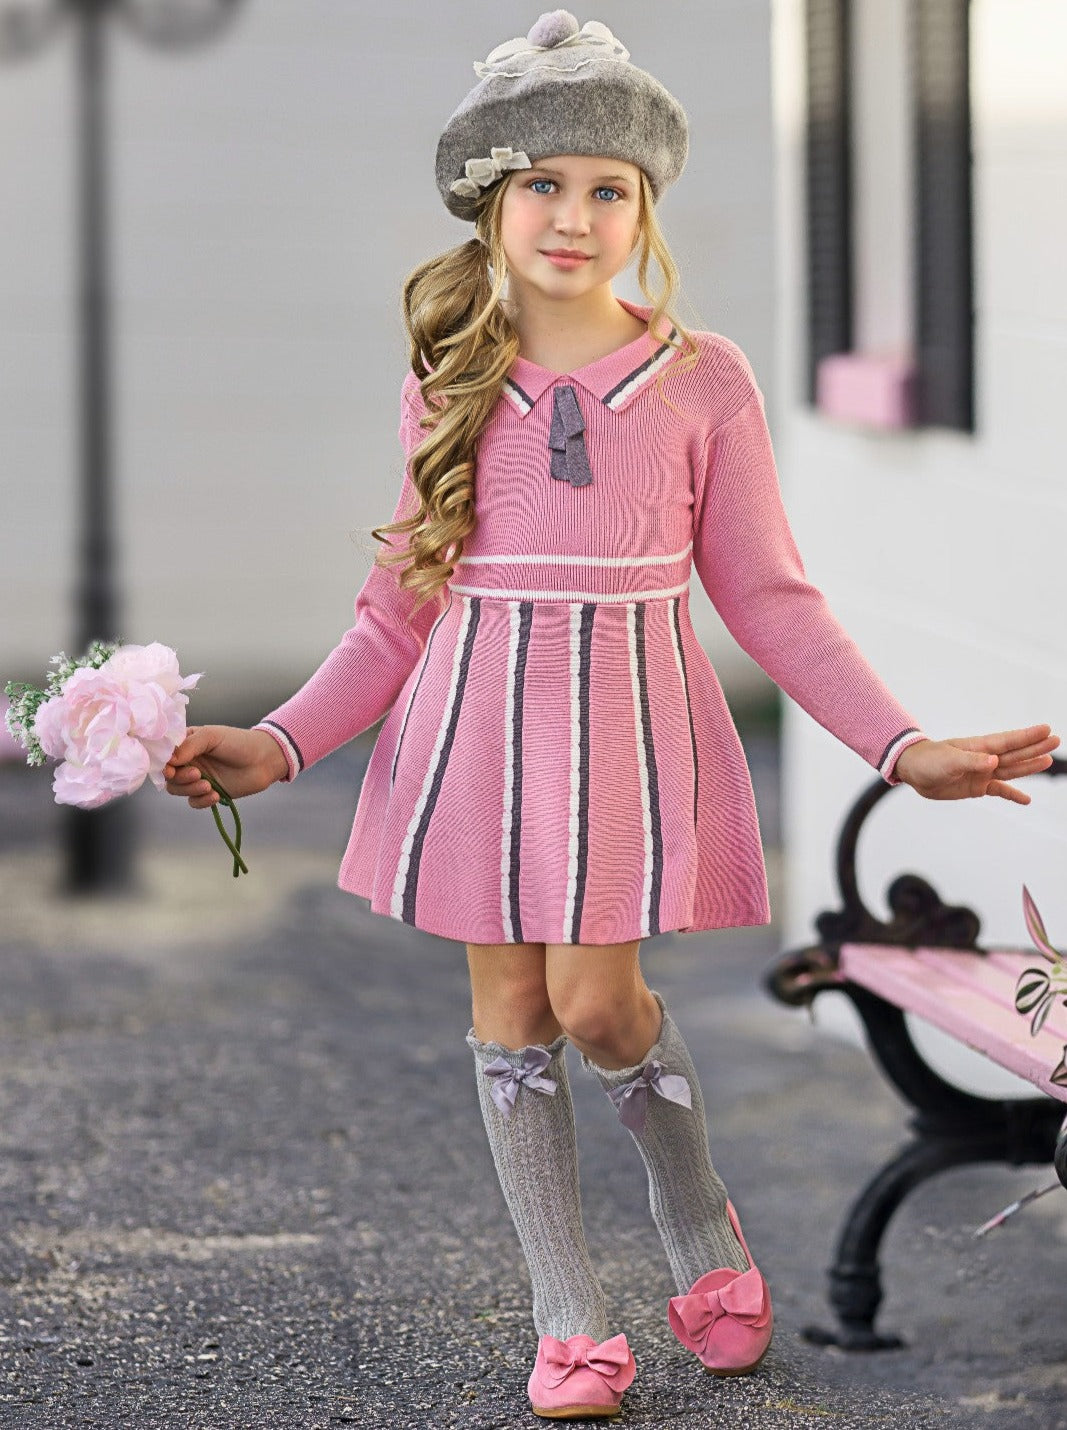 Back To School Dress | Cute Sweater Dress | Girls Clothing Boutique